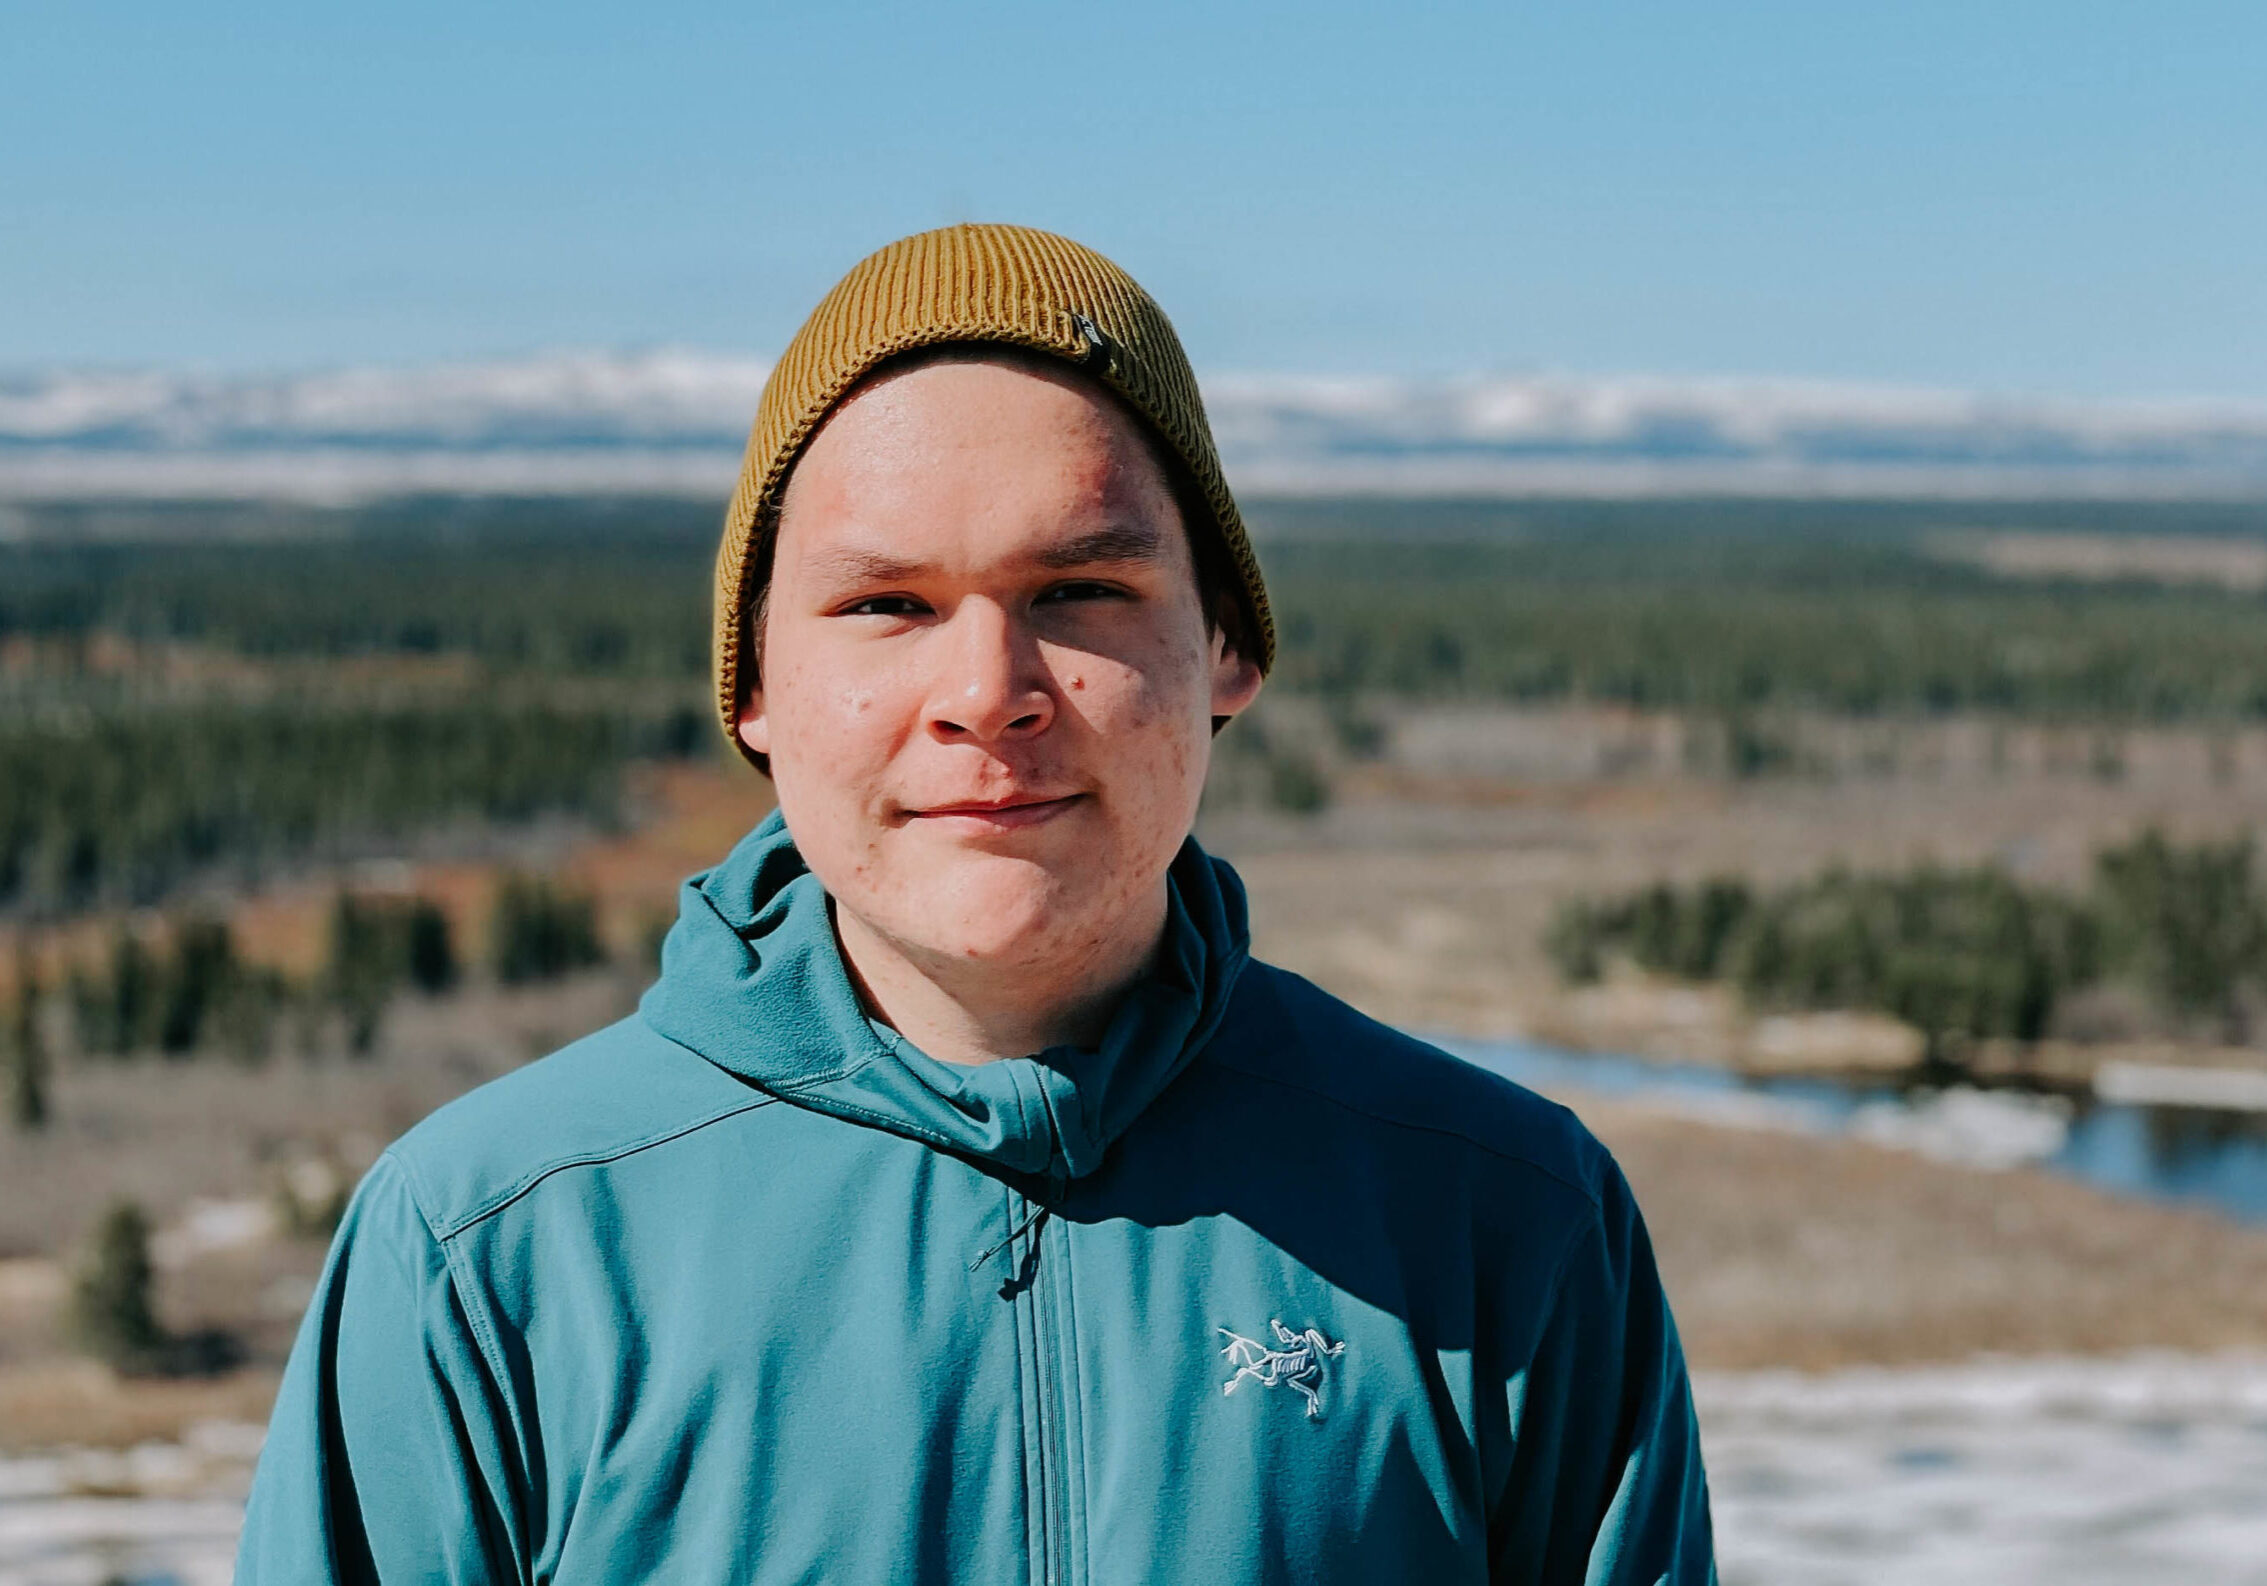 Young man looking into camera with a yellow beanie and blue jacket. Mountains and trees in the background.